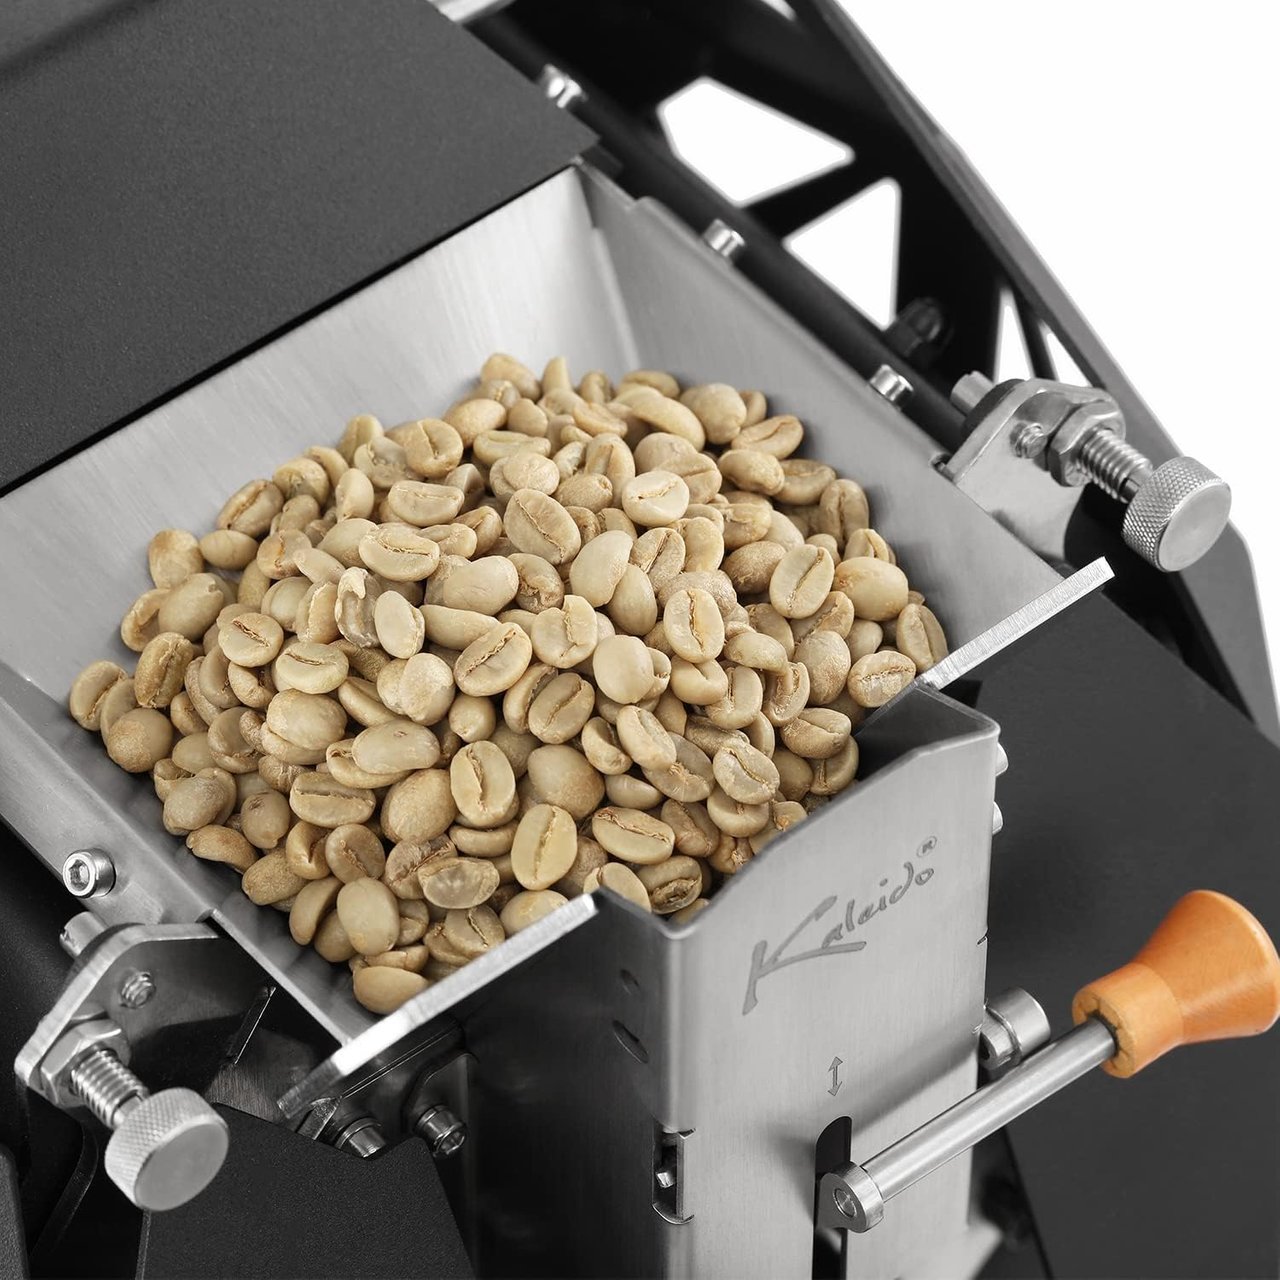 5 K2 RoastMaster Plus: Precision Coffee Roaster (50-400g) with Adjustable Heat & Debris Management System, Ideal for Home or Professional Use.